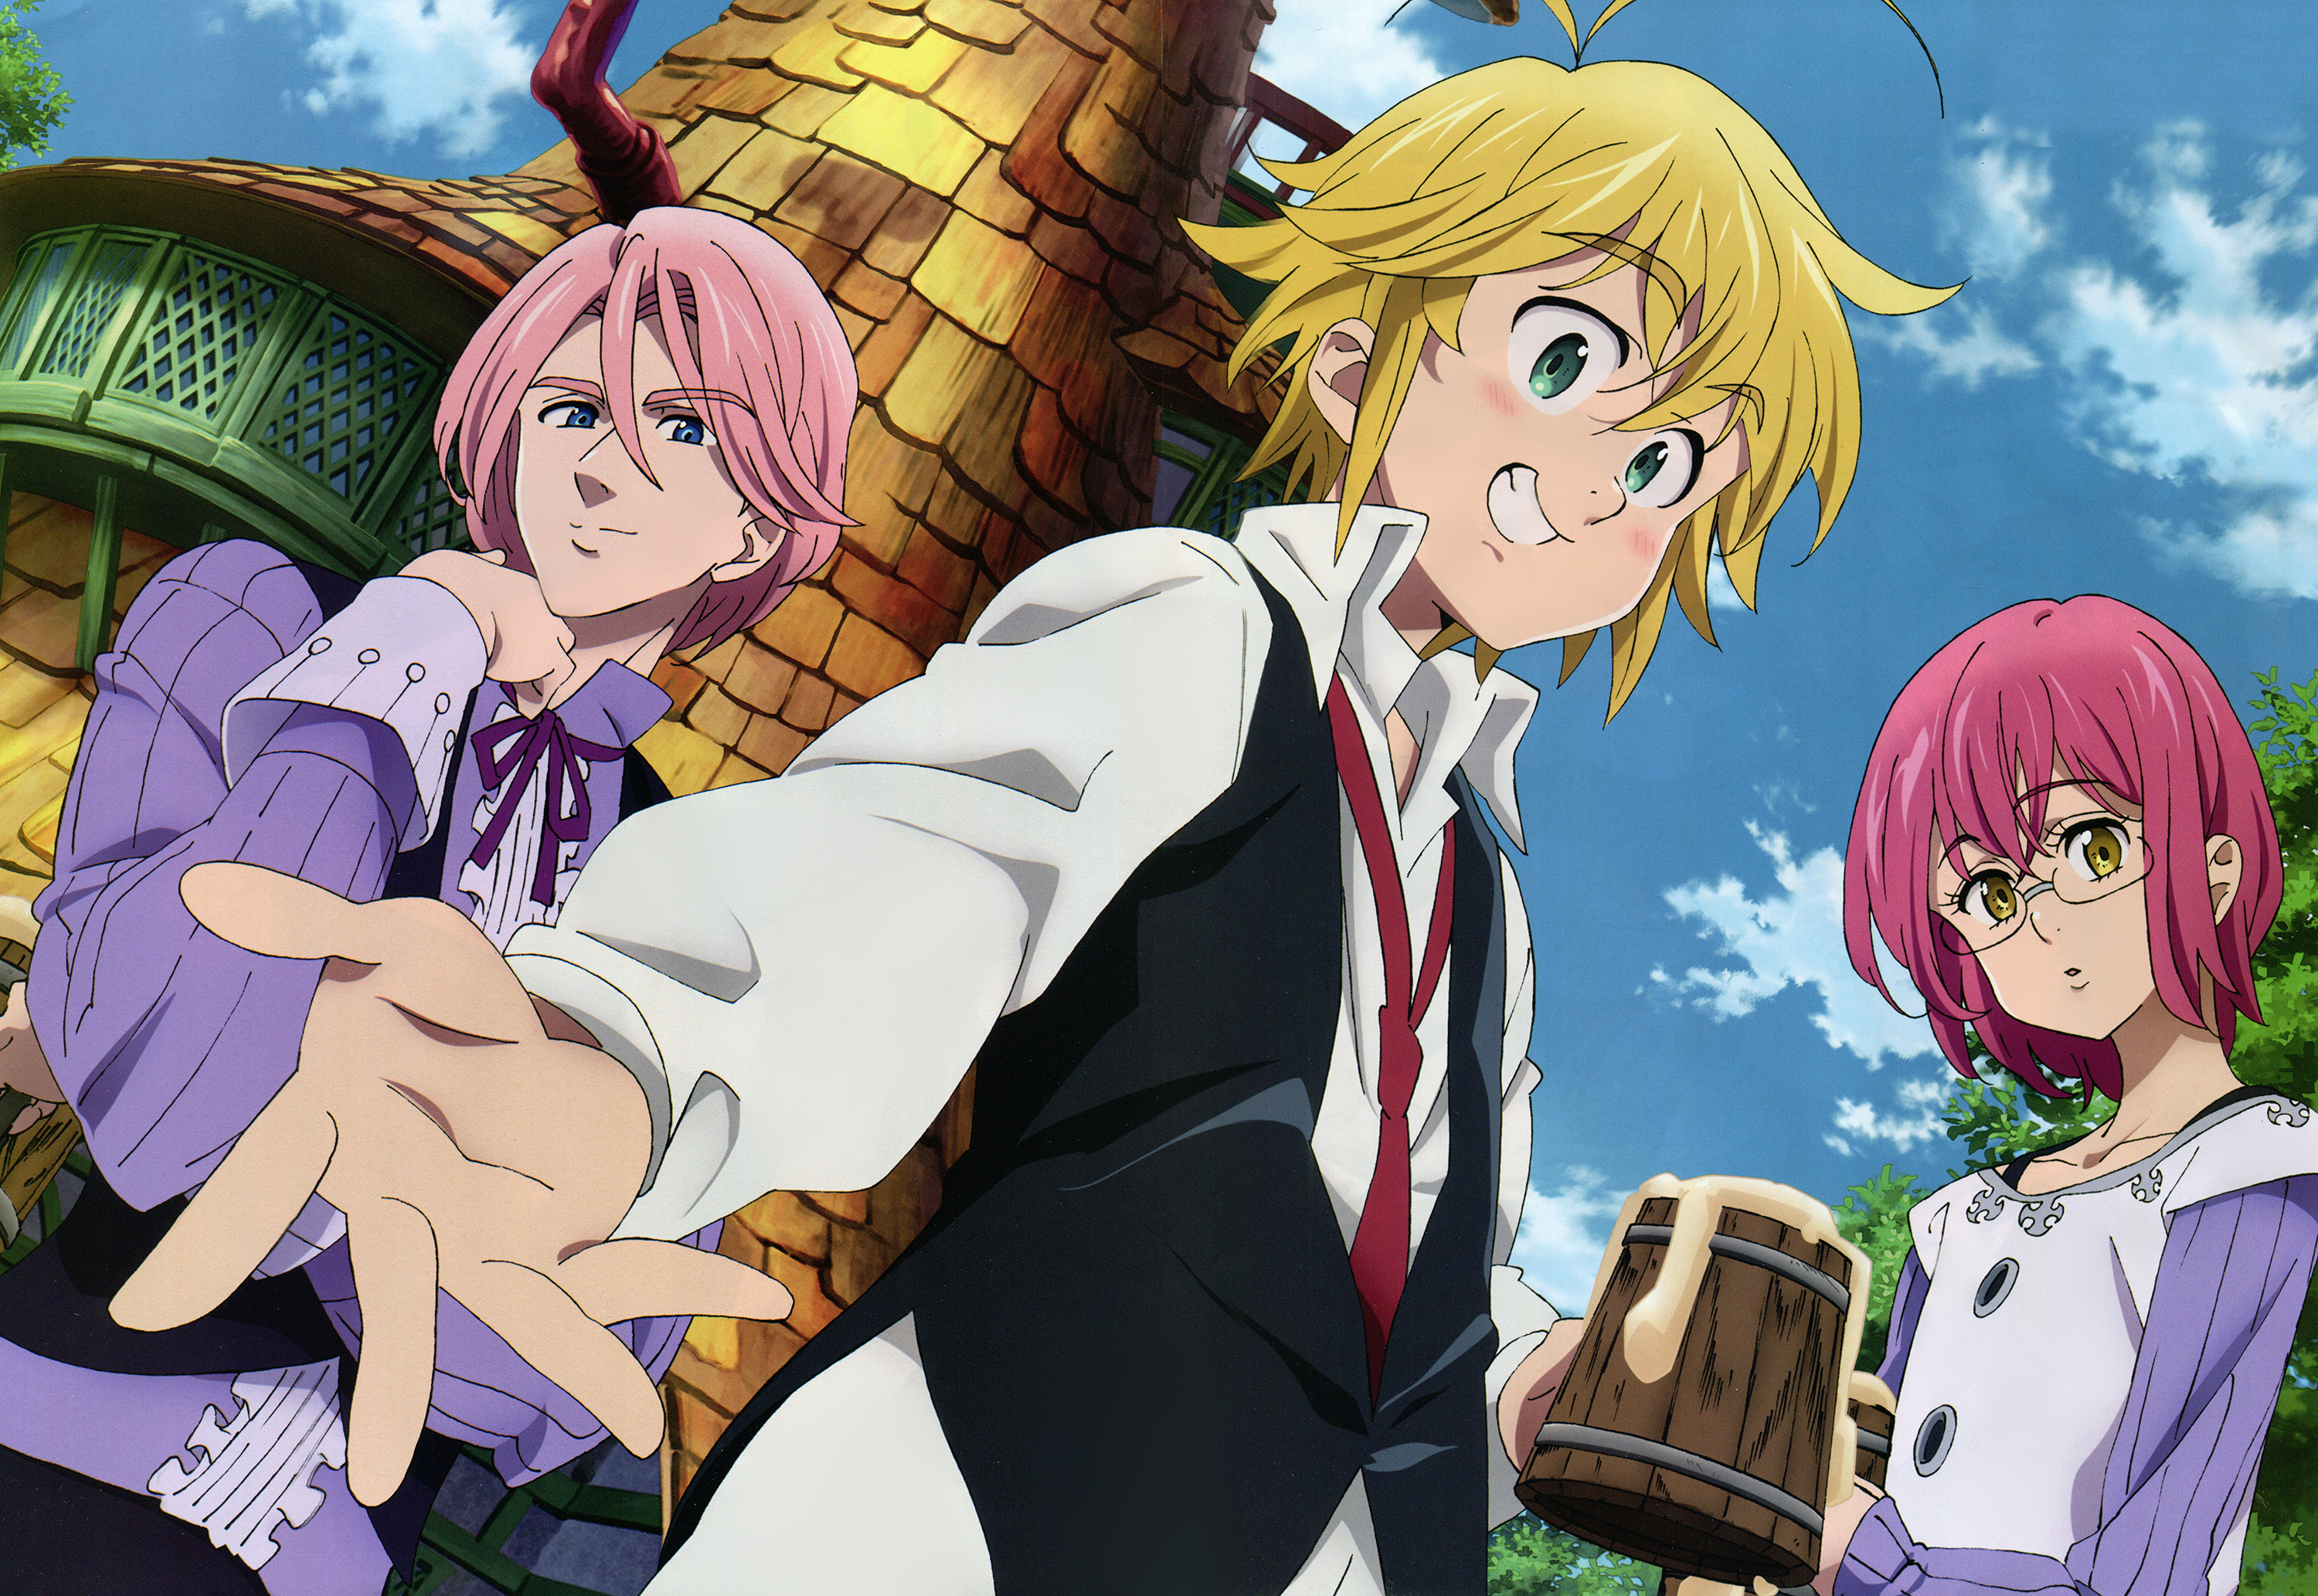 Gilthunder The Seven Deadly Sins Gowther The Seven Deadly Sins Meliodas The Seven Deadly Sins 3000x2066